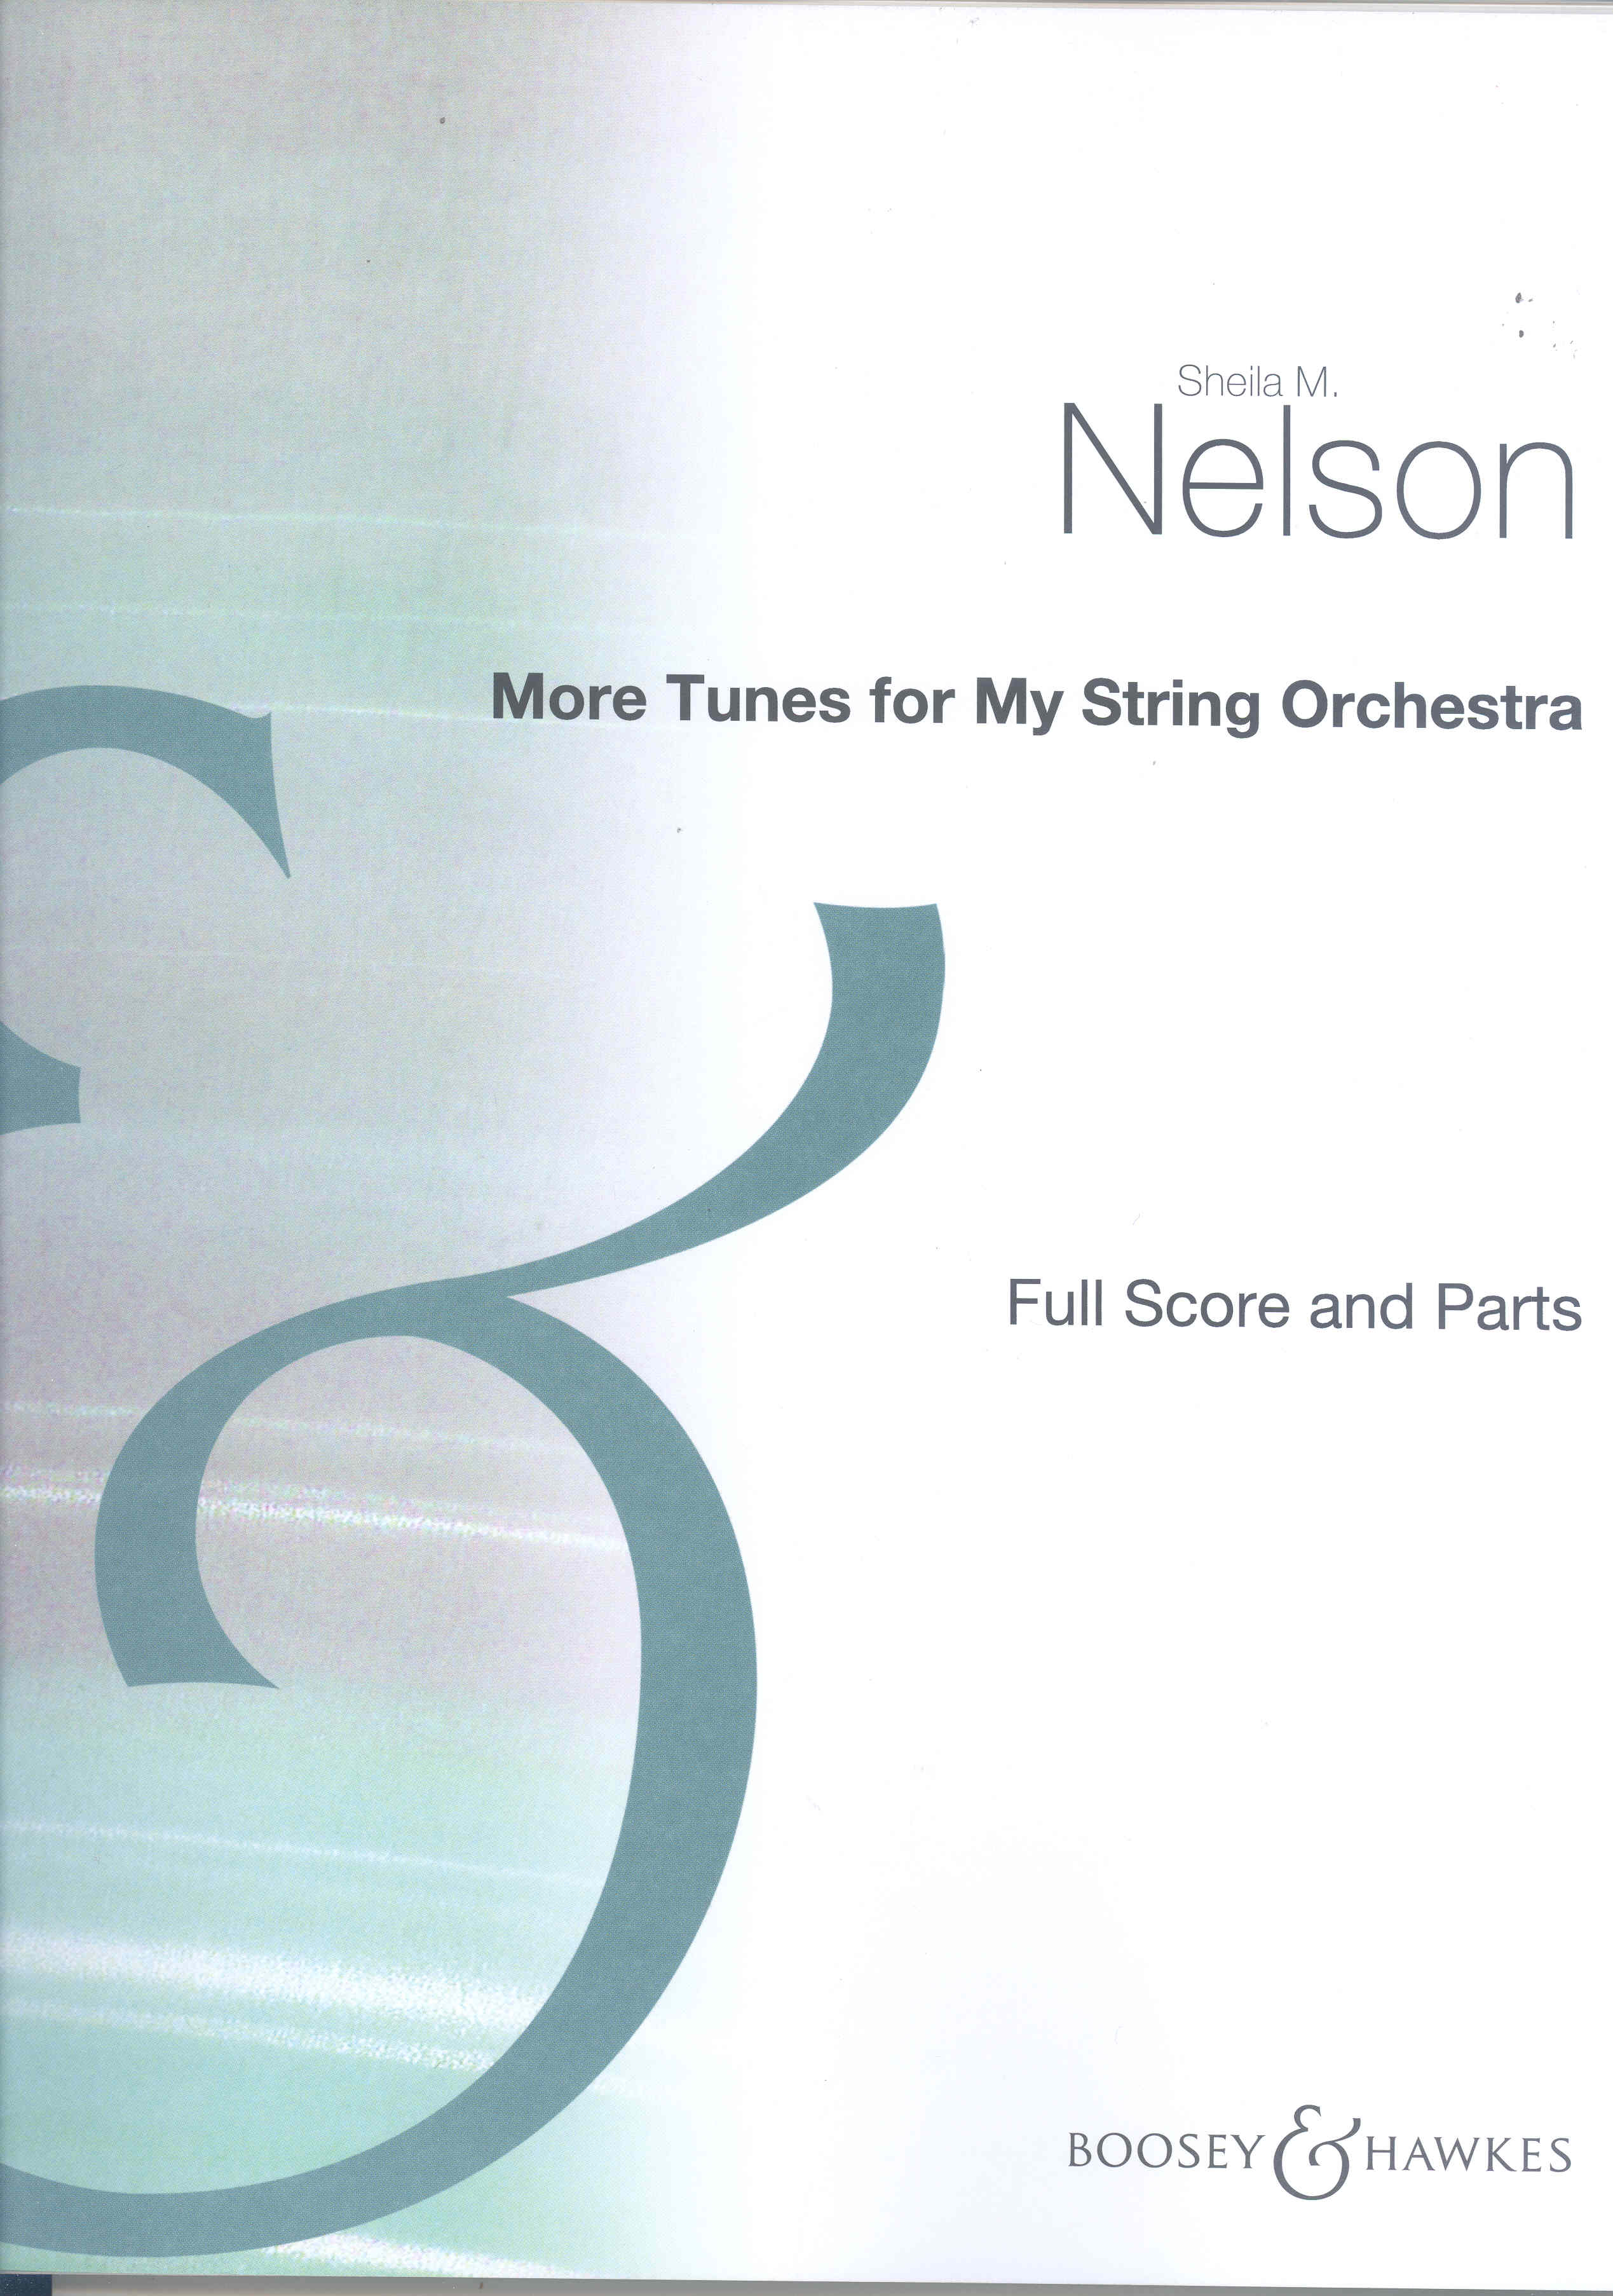 More Tunes For My String Orchestra Score & Parts Sheet Music Songbook